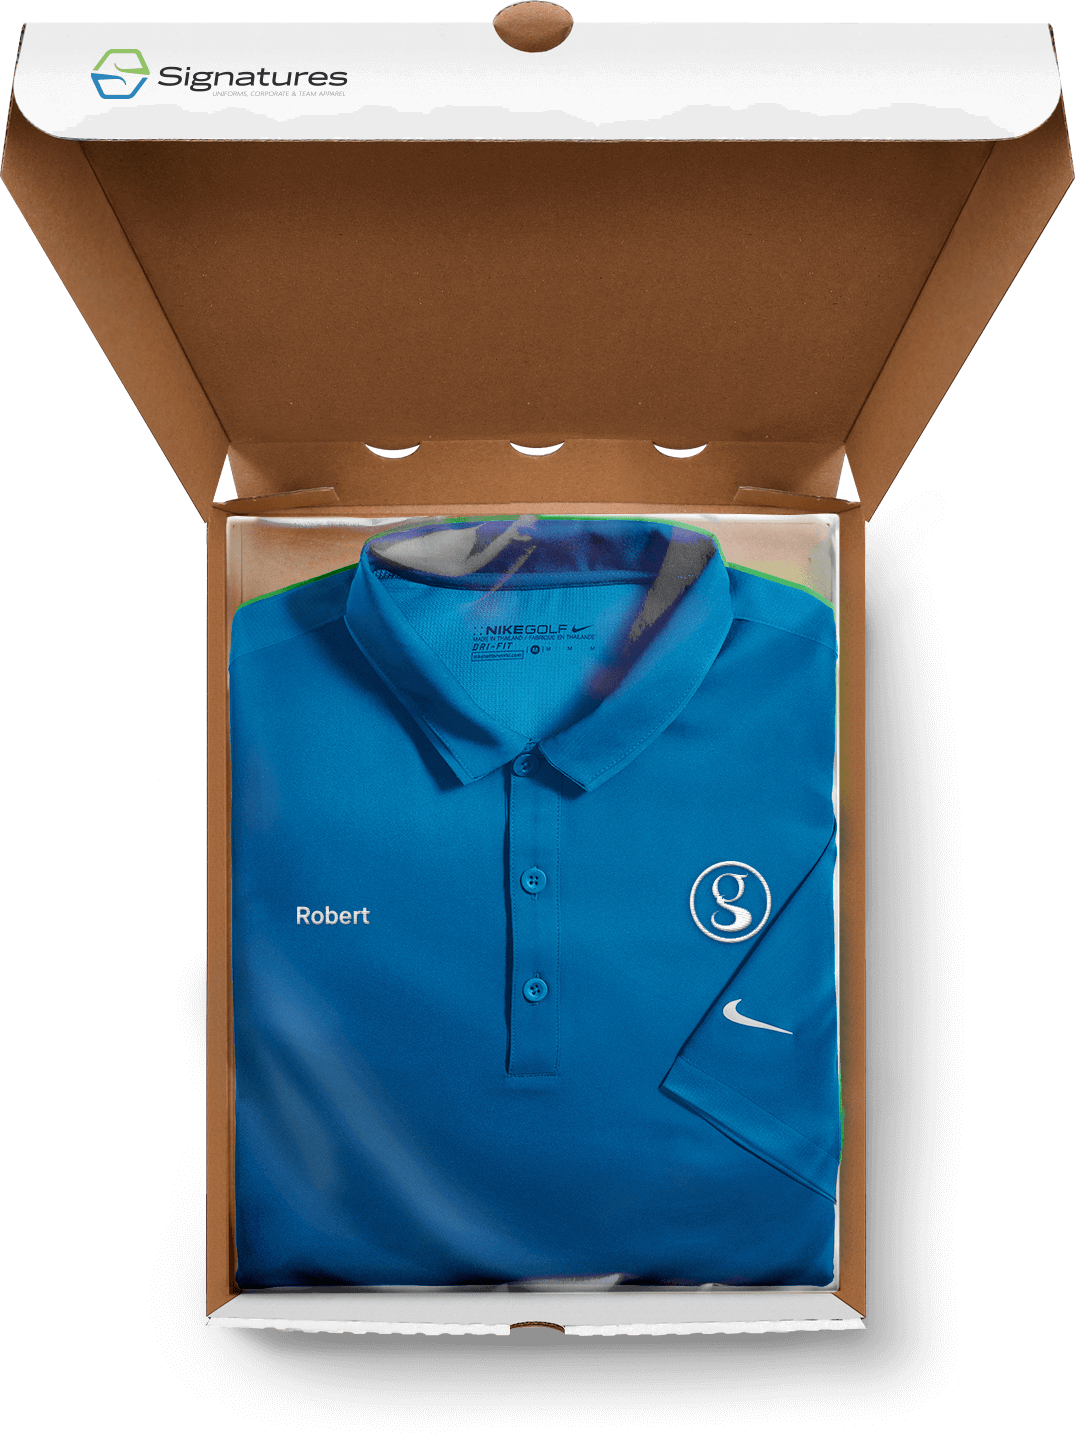 A blue branded polo packaged in a ready-to-ship box